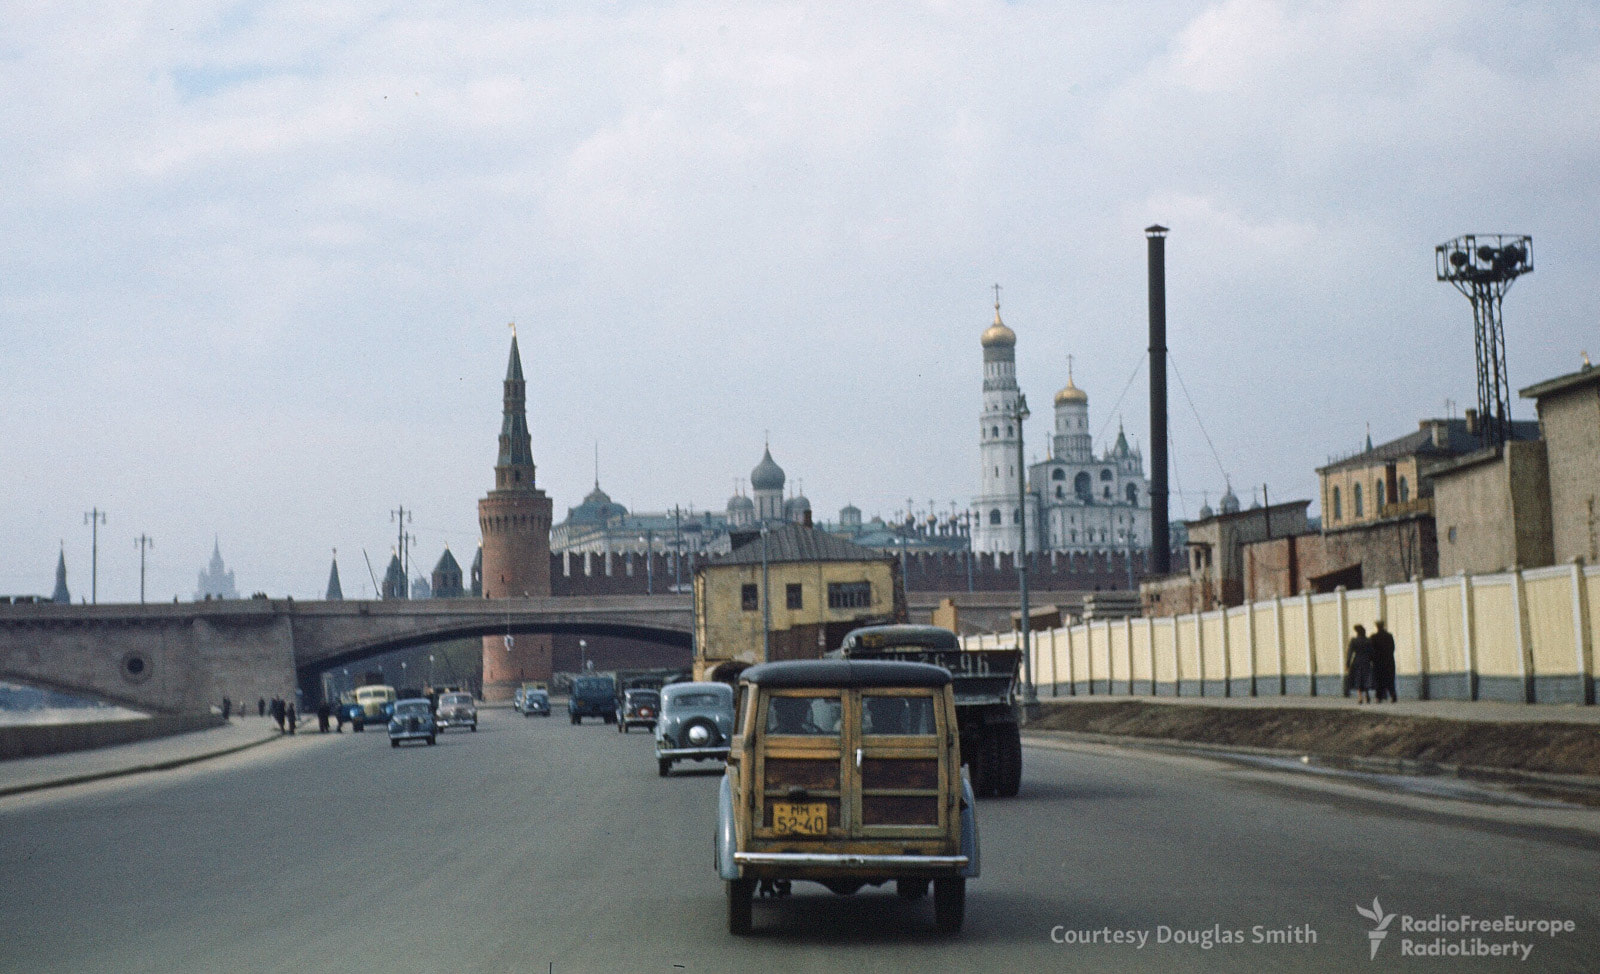 Photographs of Life in the Soviet Union in the 1950s Taken by a U.S. Diplomat